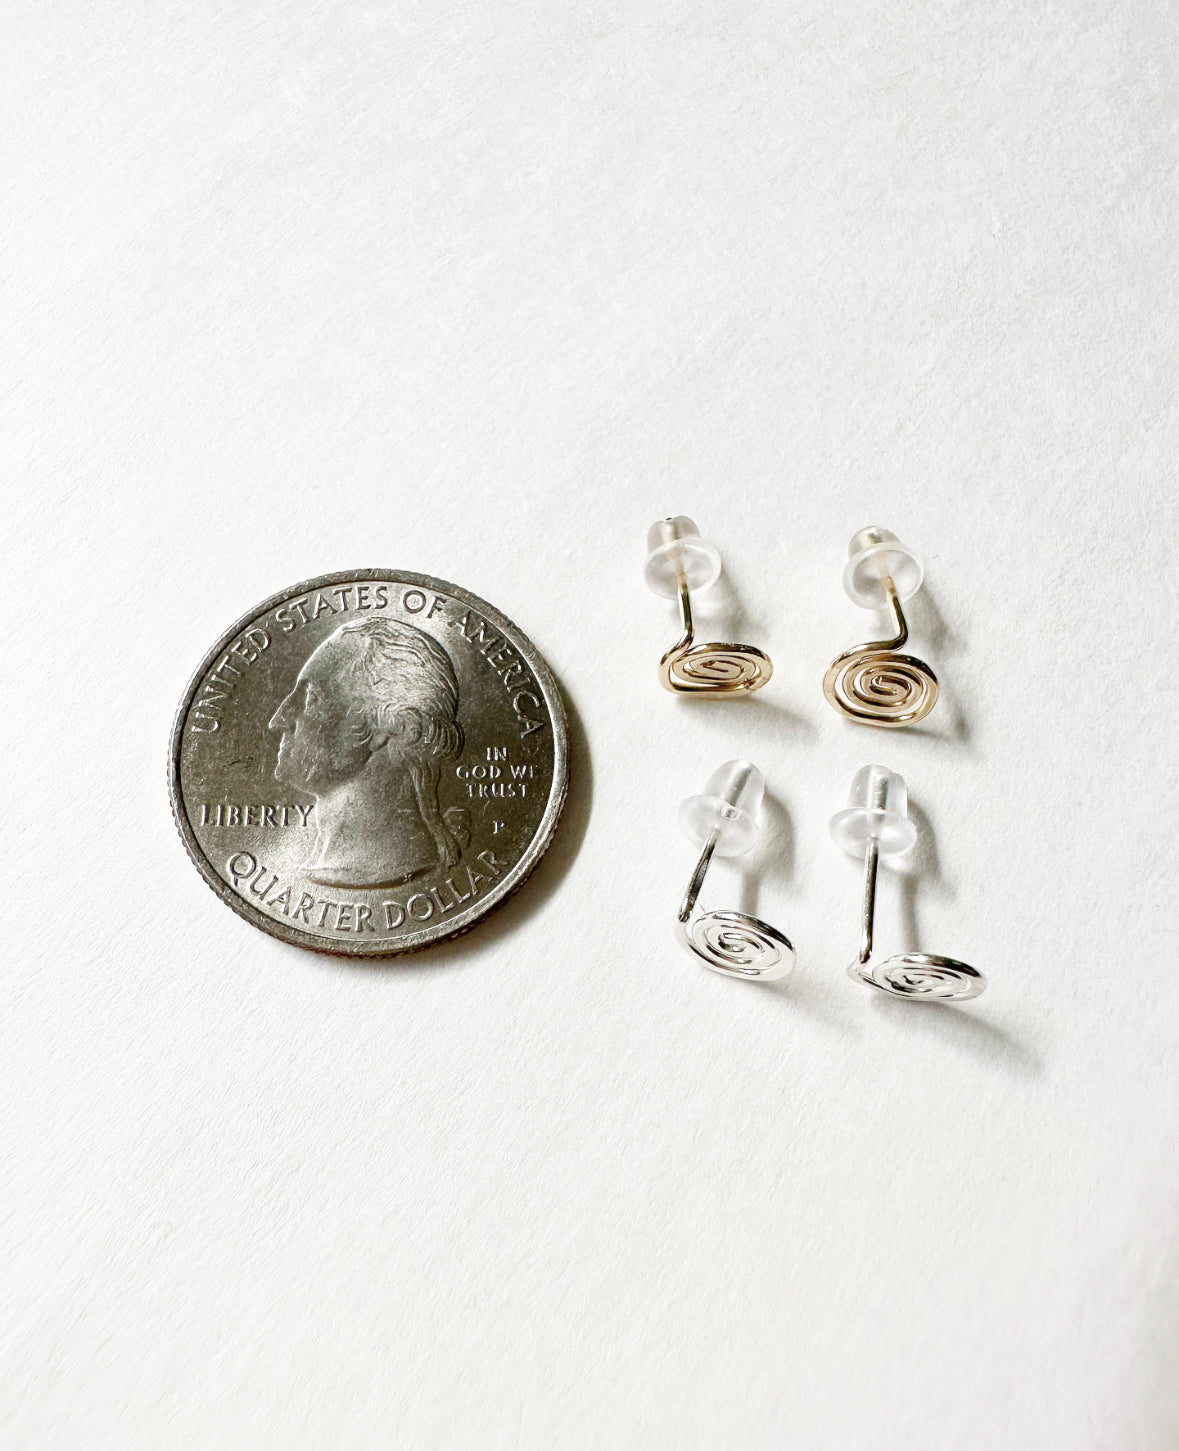 Gold and Silver Vortex Stud Earrings compared to a quarter for size comparison.